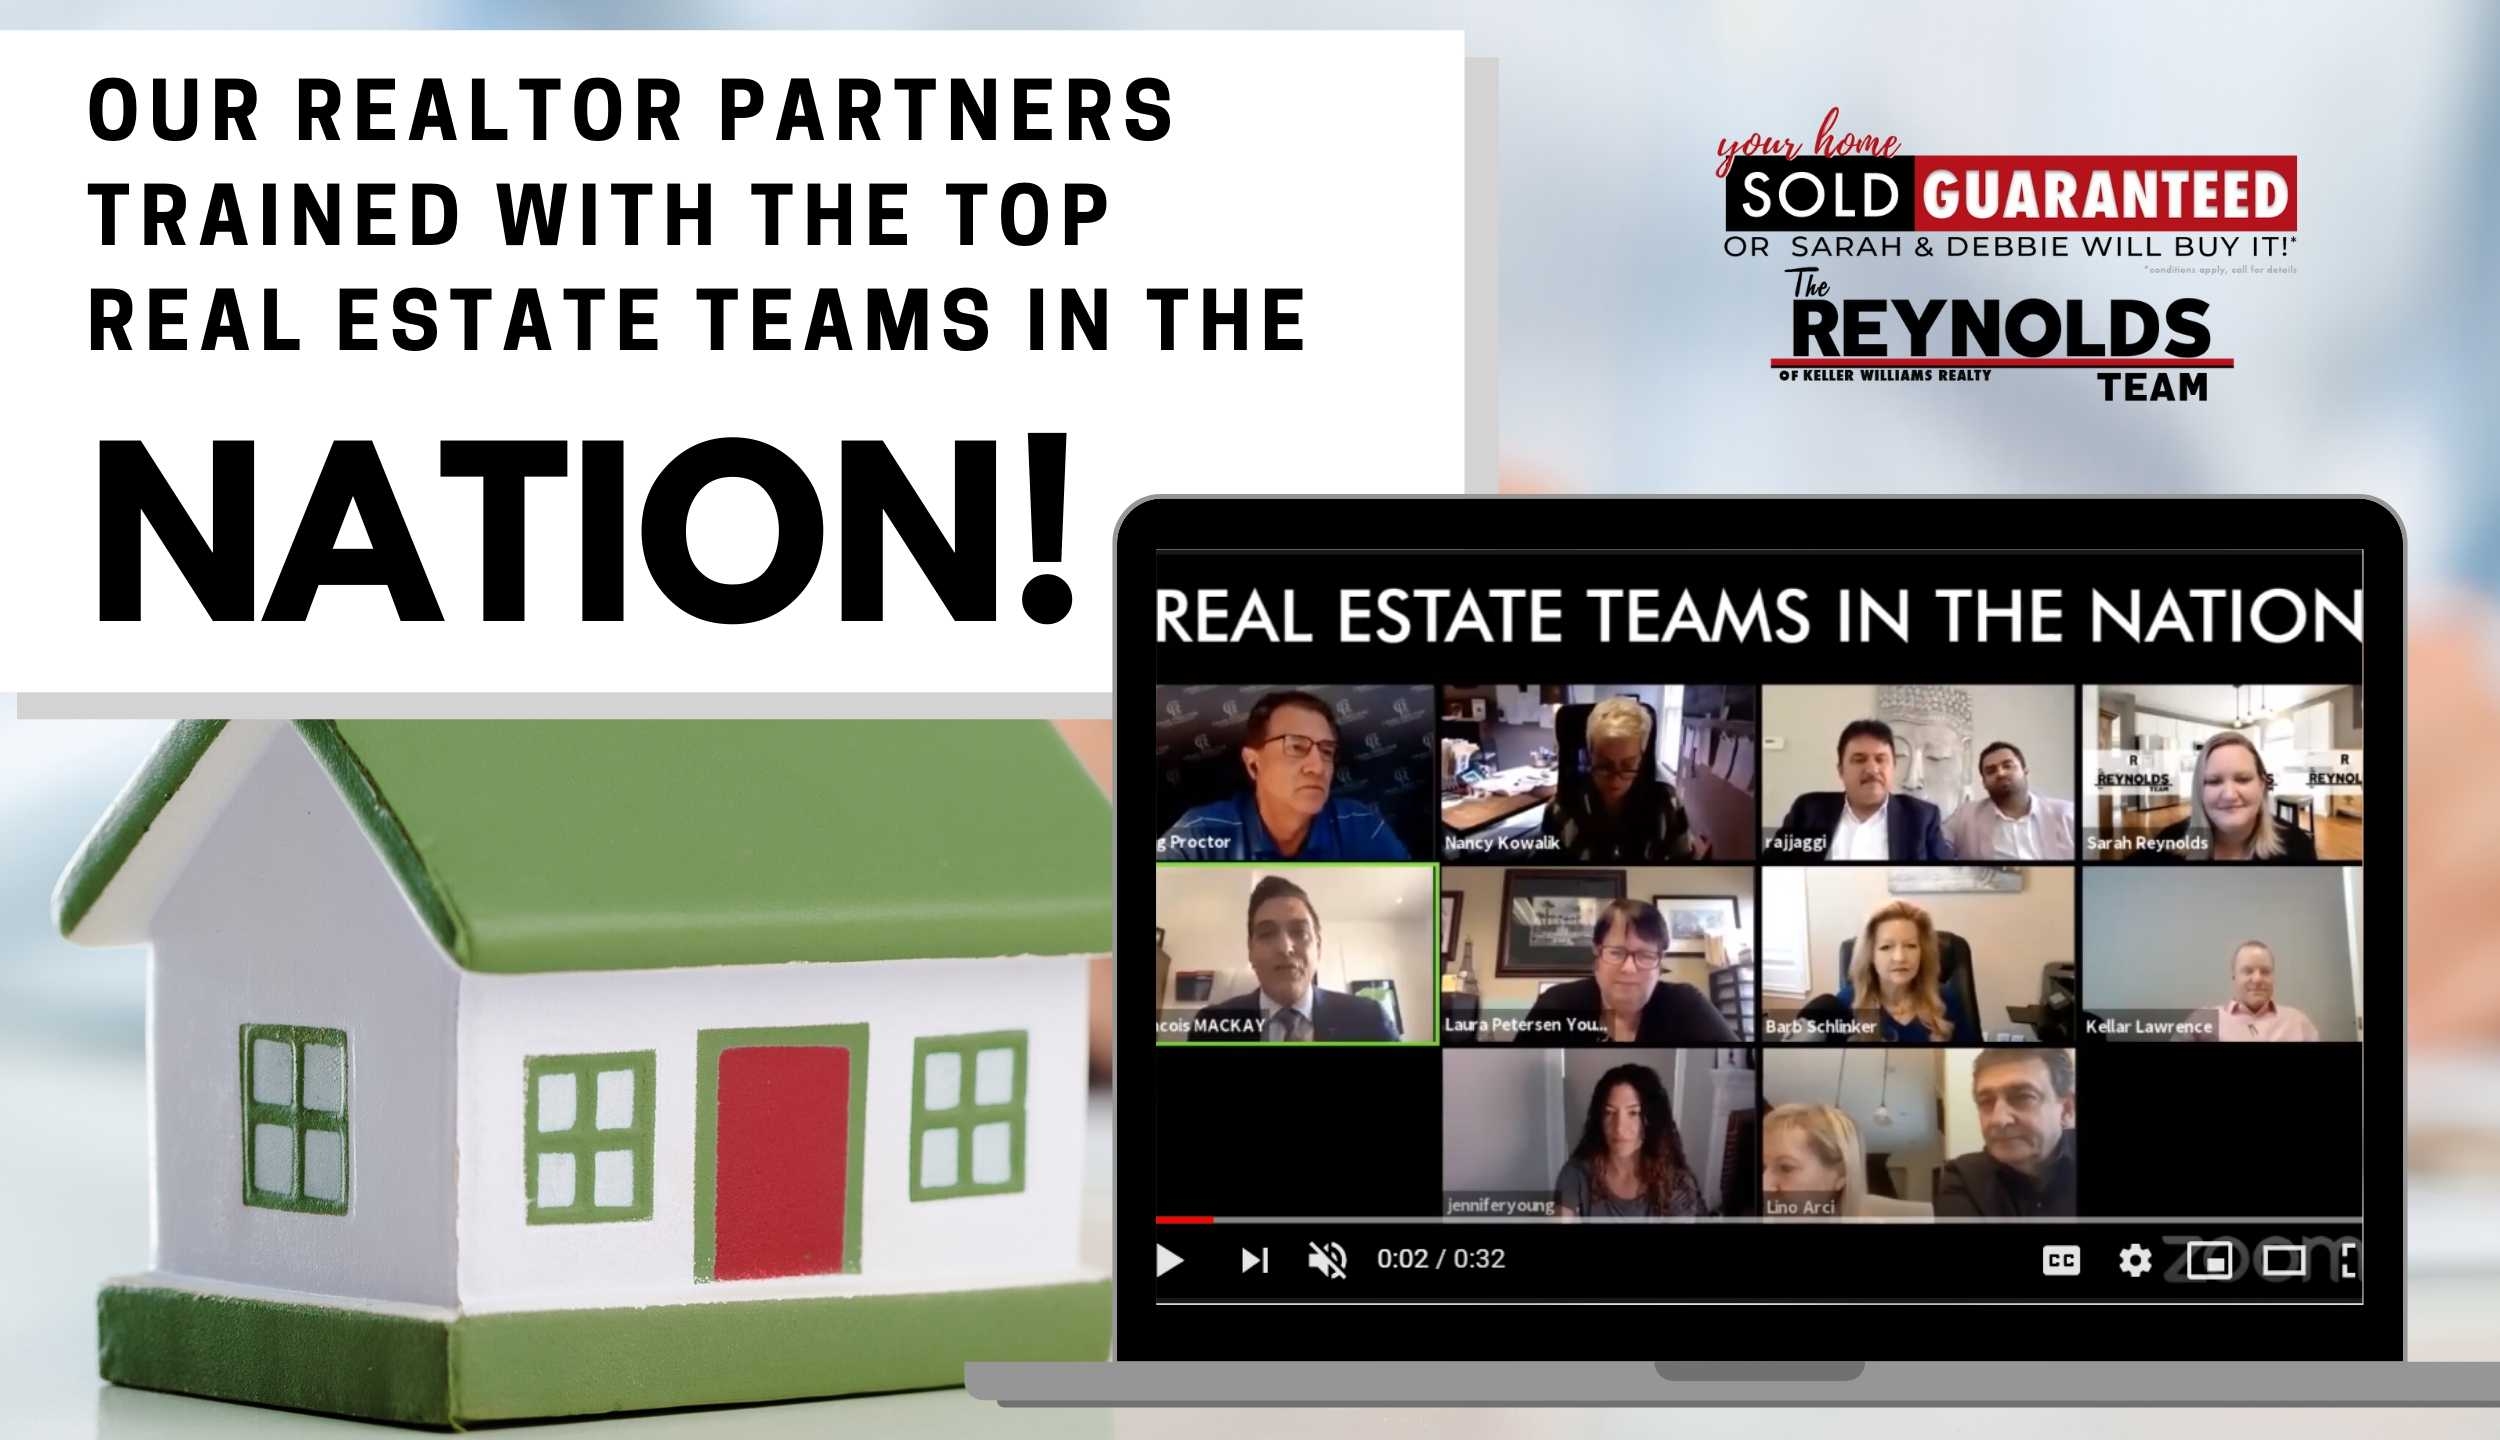 Our Realtor Partners Trained with the Top Real Estate Teams in the Nation!